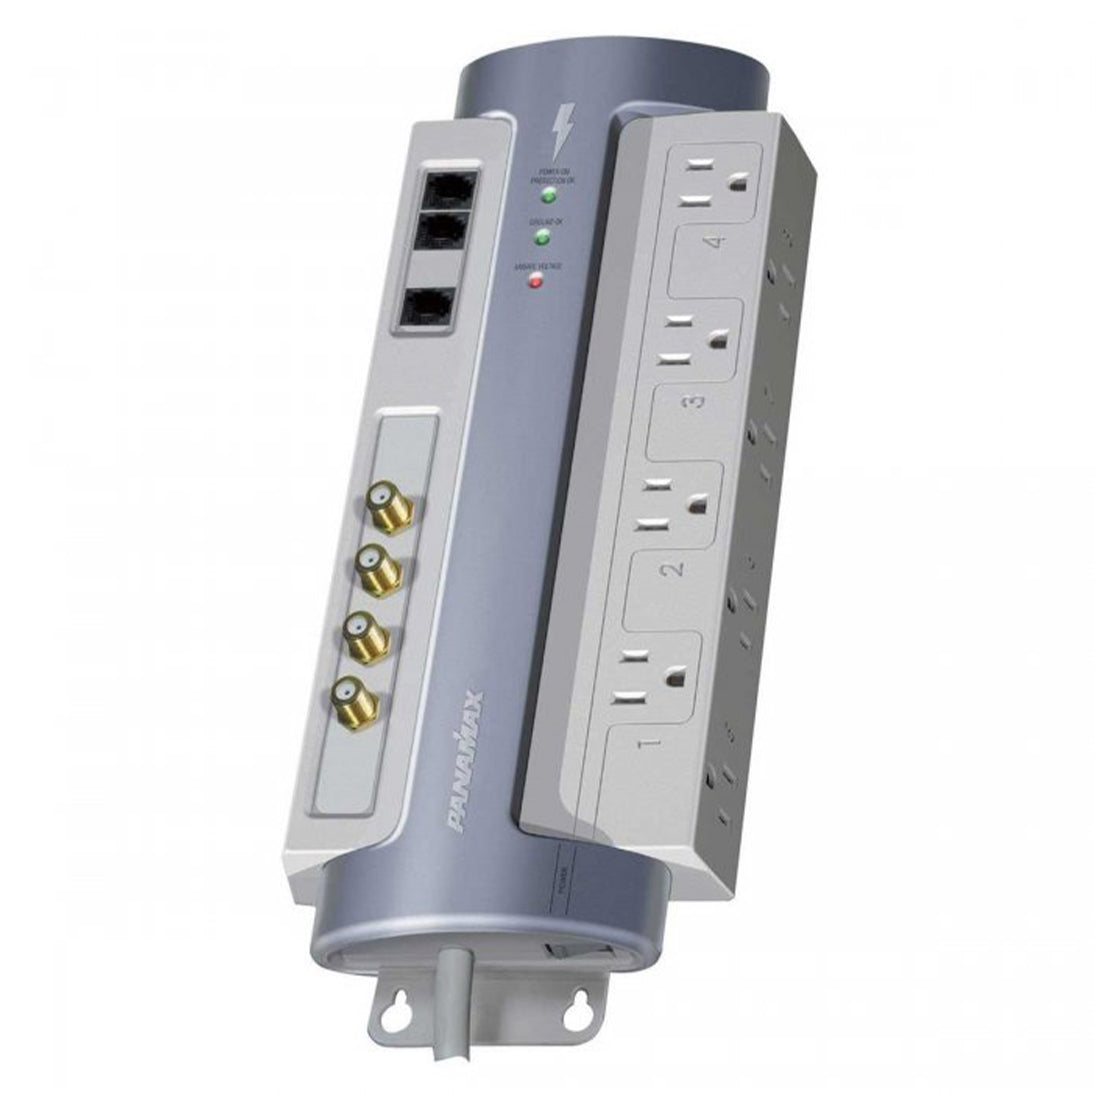 Panamax M8-AV 8-Outlet Surge Protecting Power Conditioner